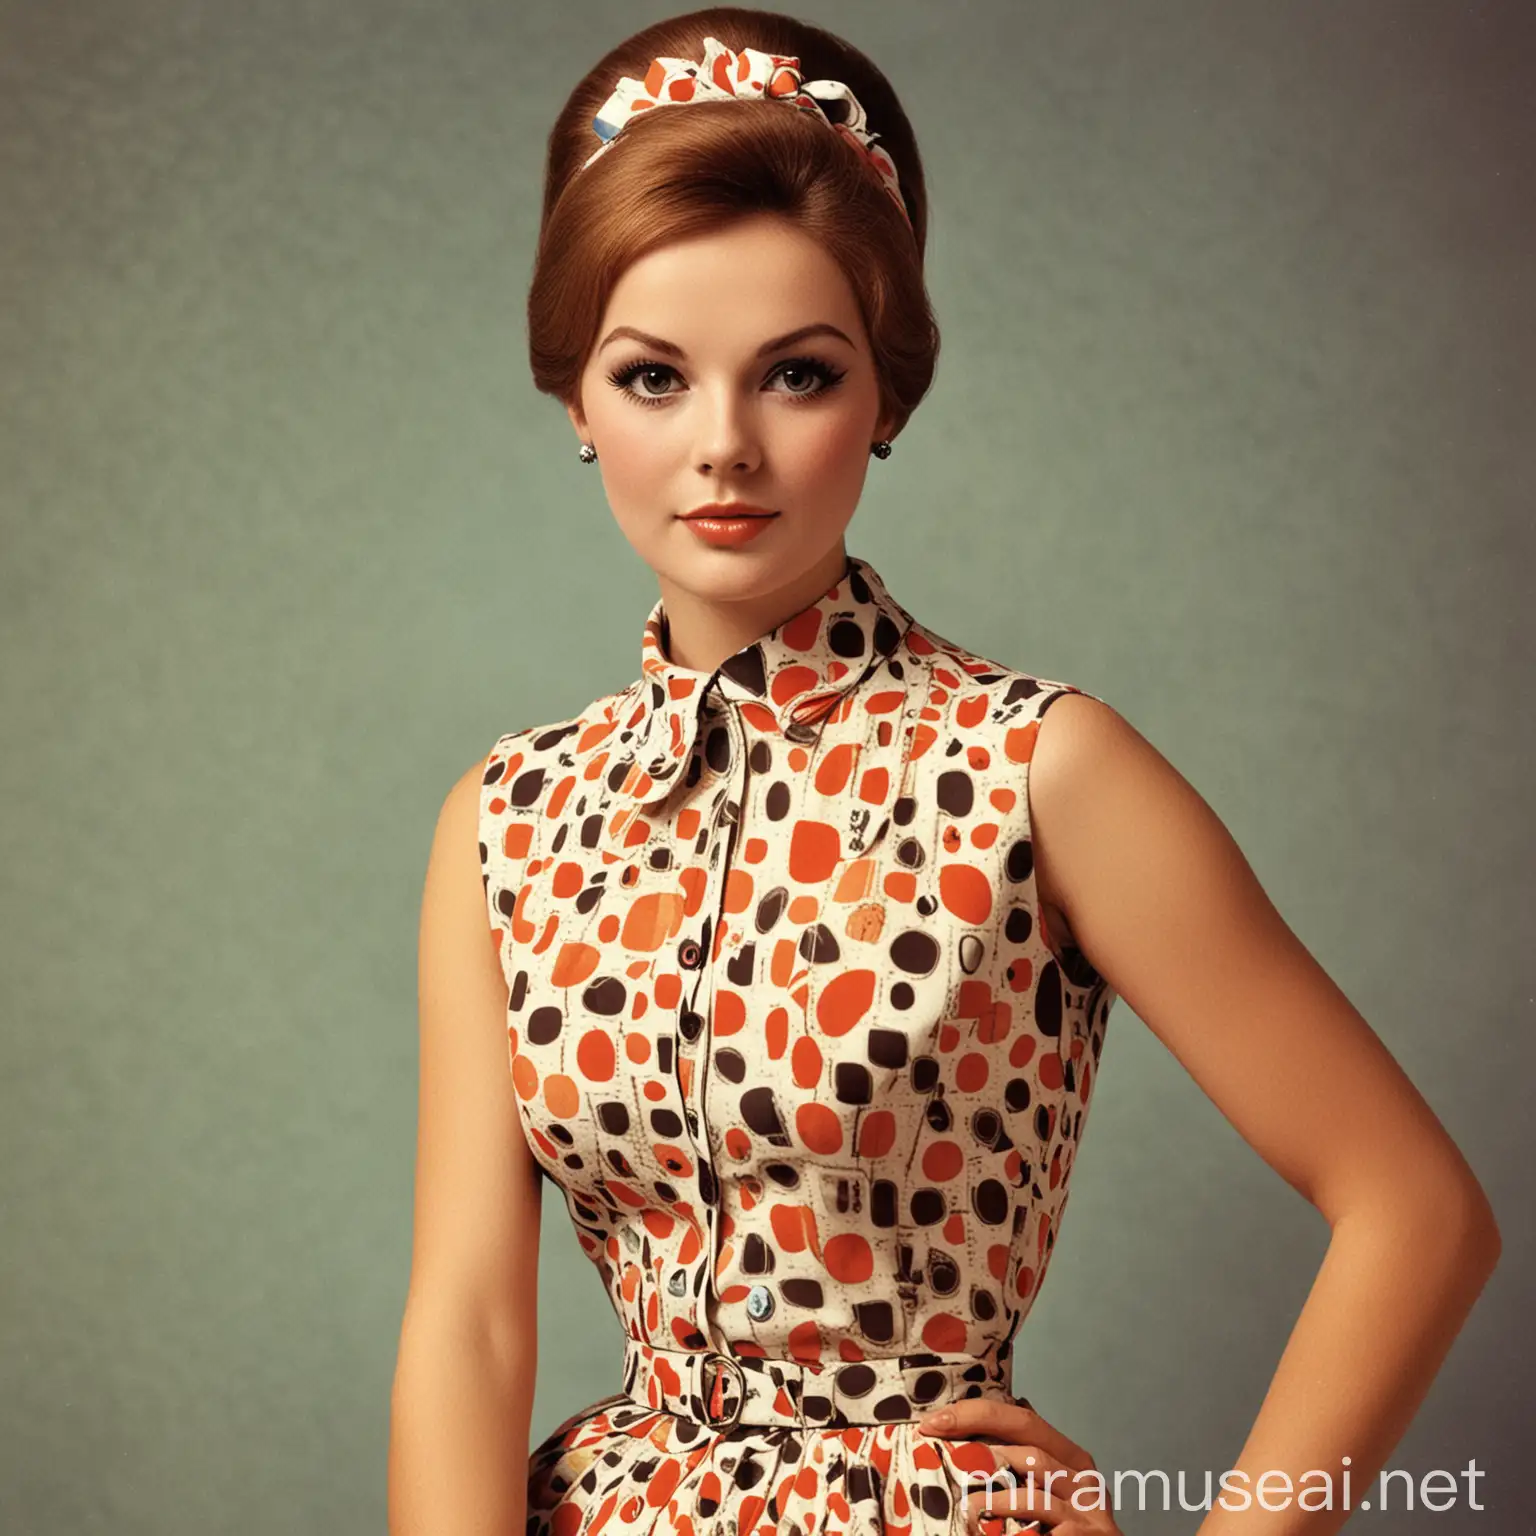  vintage magazine photo of a Lady dressed in 60's fashion style